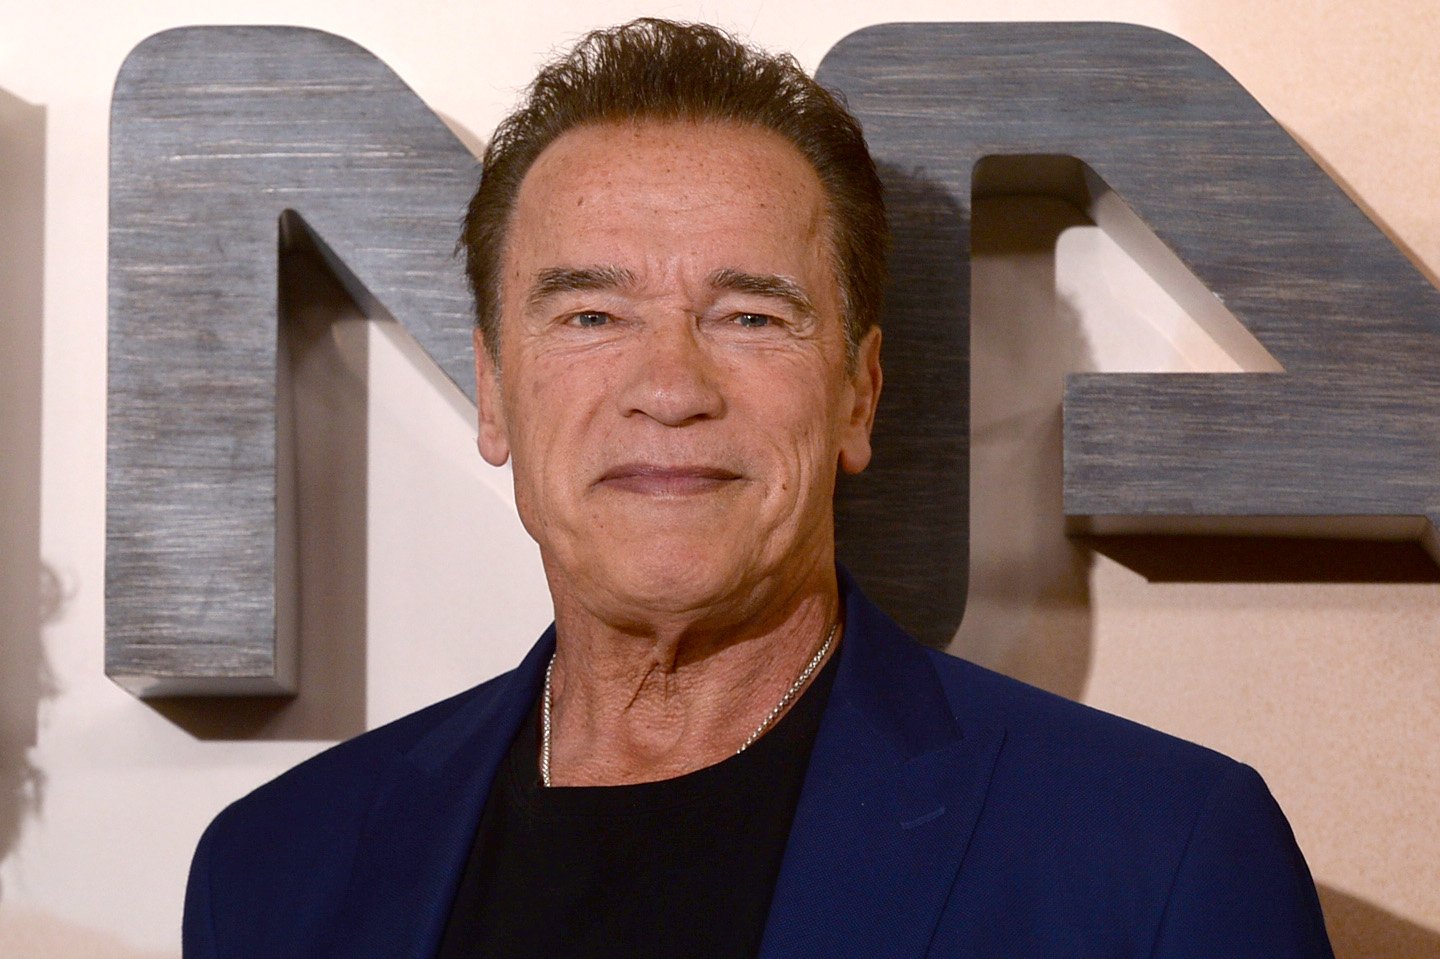 Arnold Schwarzenegger pictured at the "Terminator: Dark Fate" photocall in 2019, London, England. | Photo: Getty Images